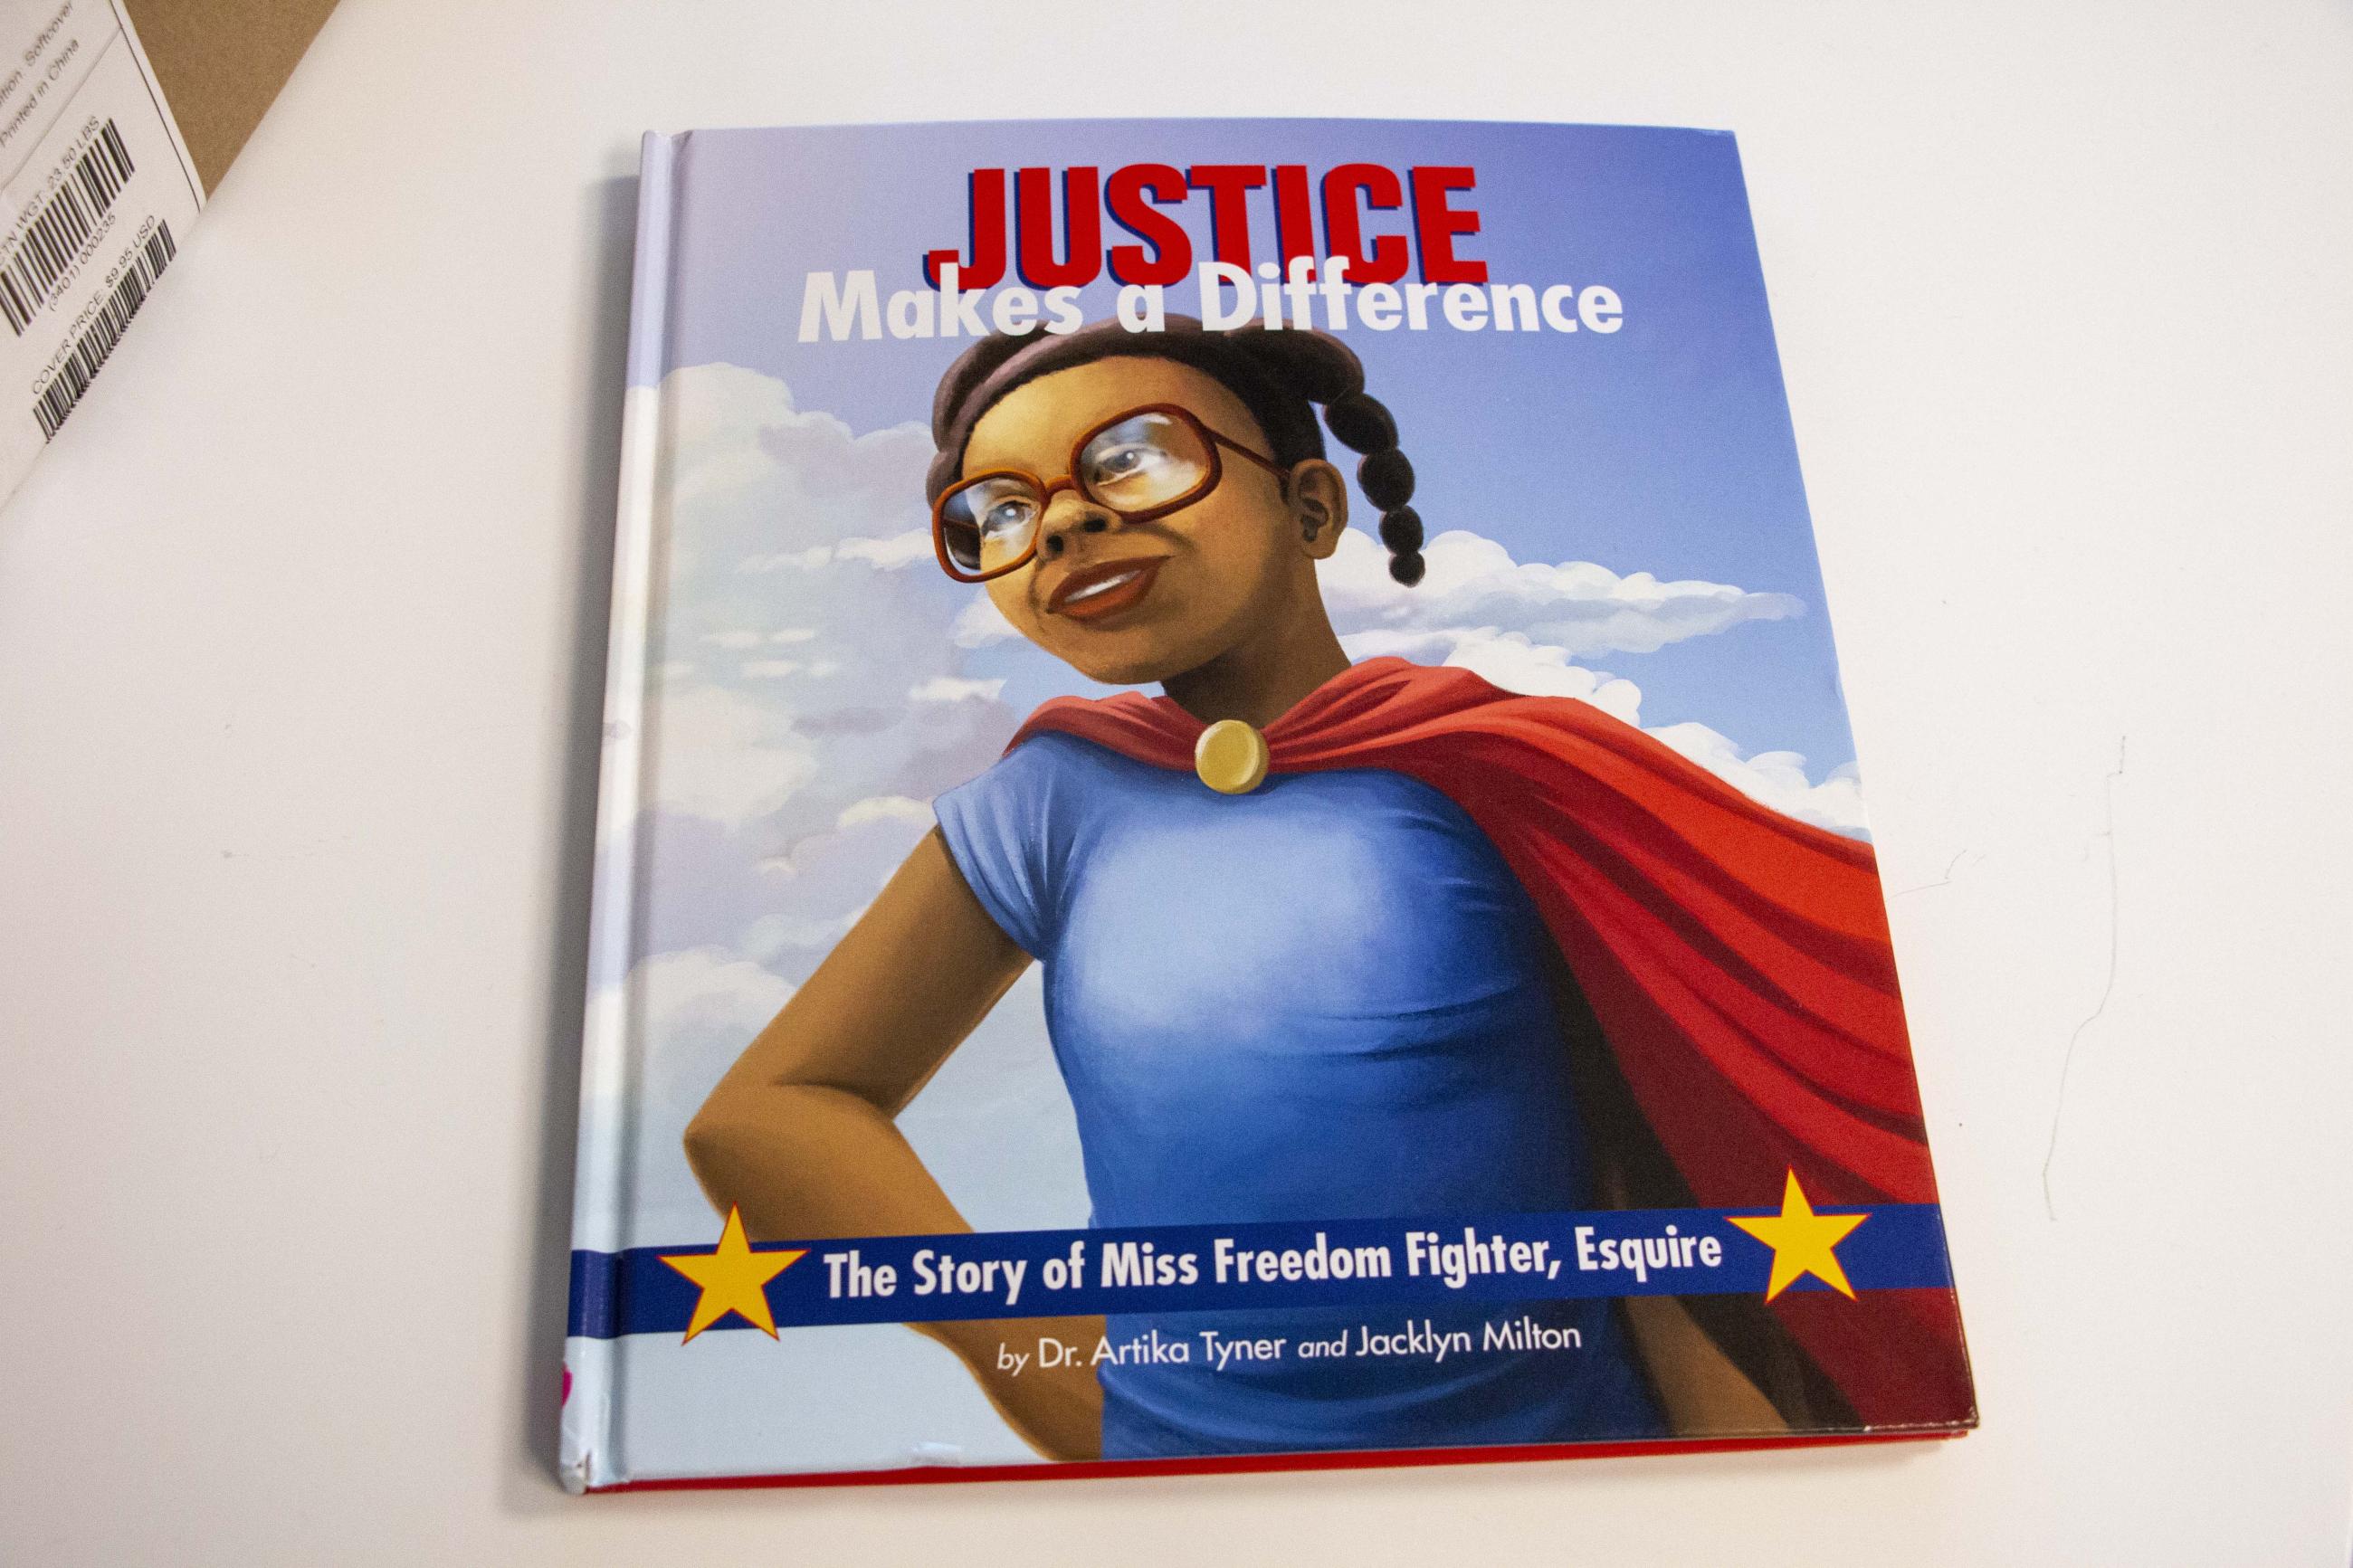 Picture of the book "Justice Makes a Difference," by Artika Tyner and Jacklyn Milton